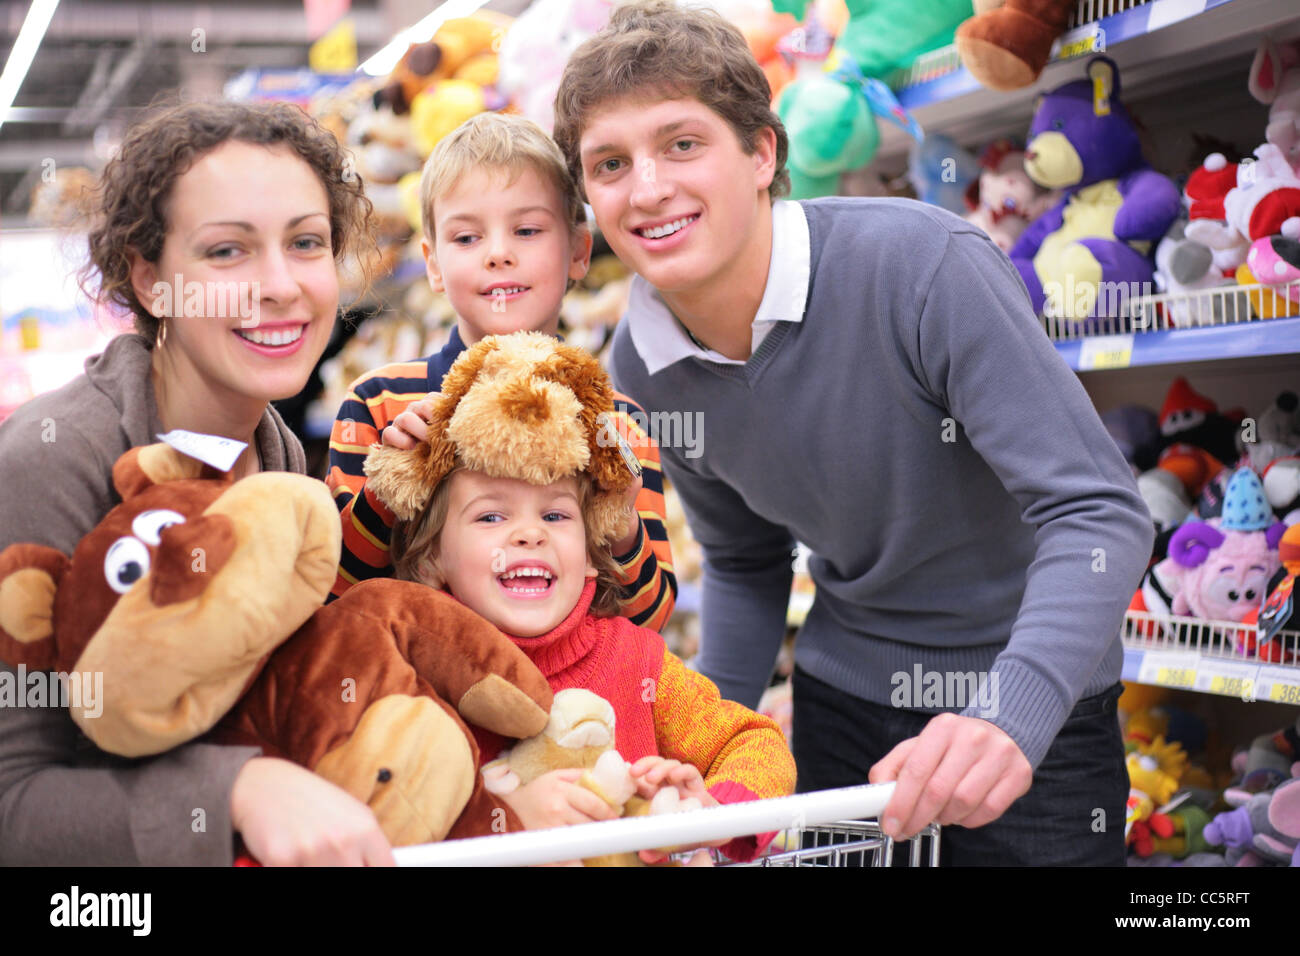 Family of four in shop with soft toys, focus on little girl Stock Photo